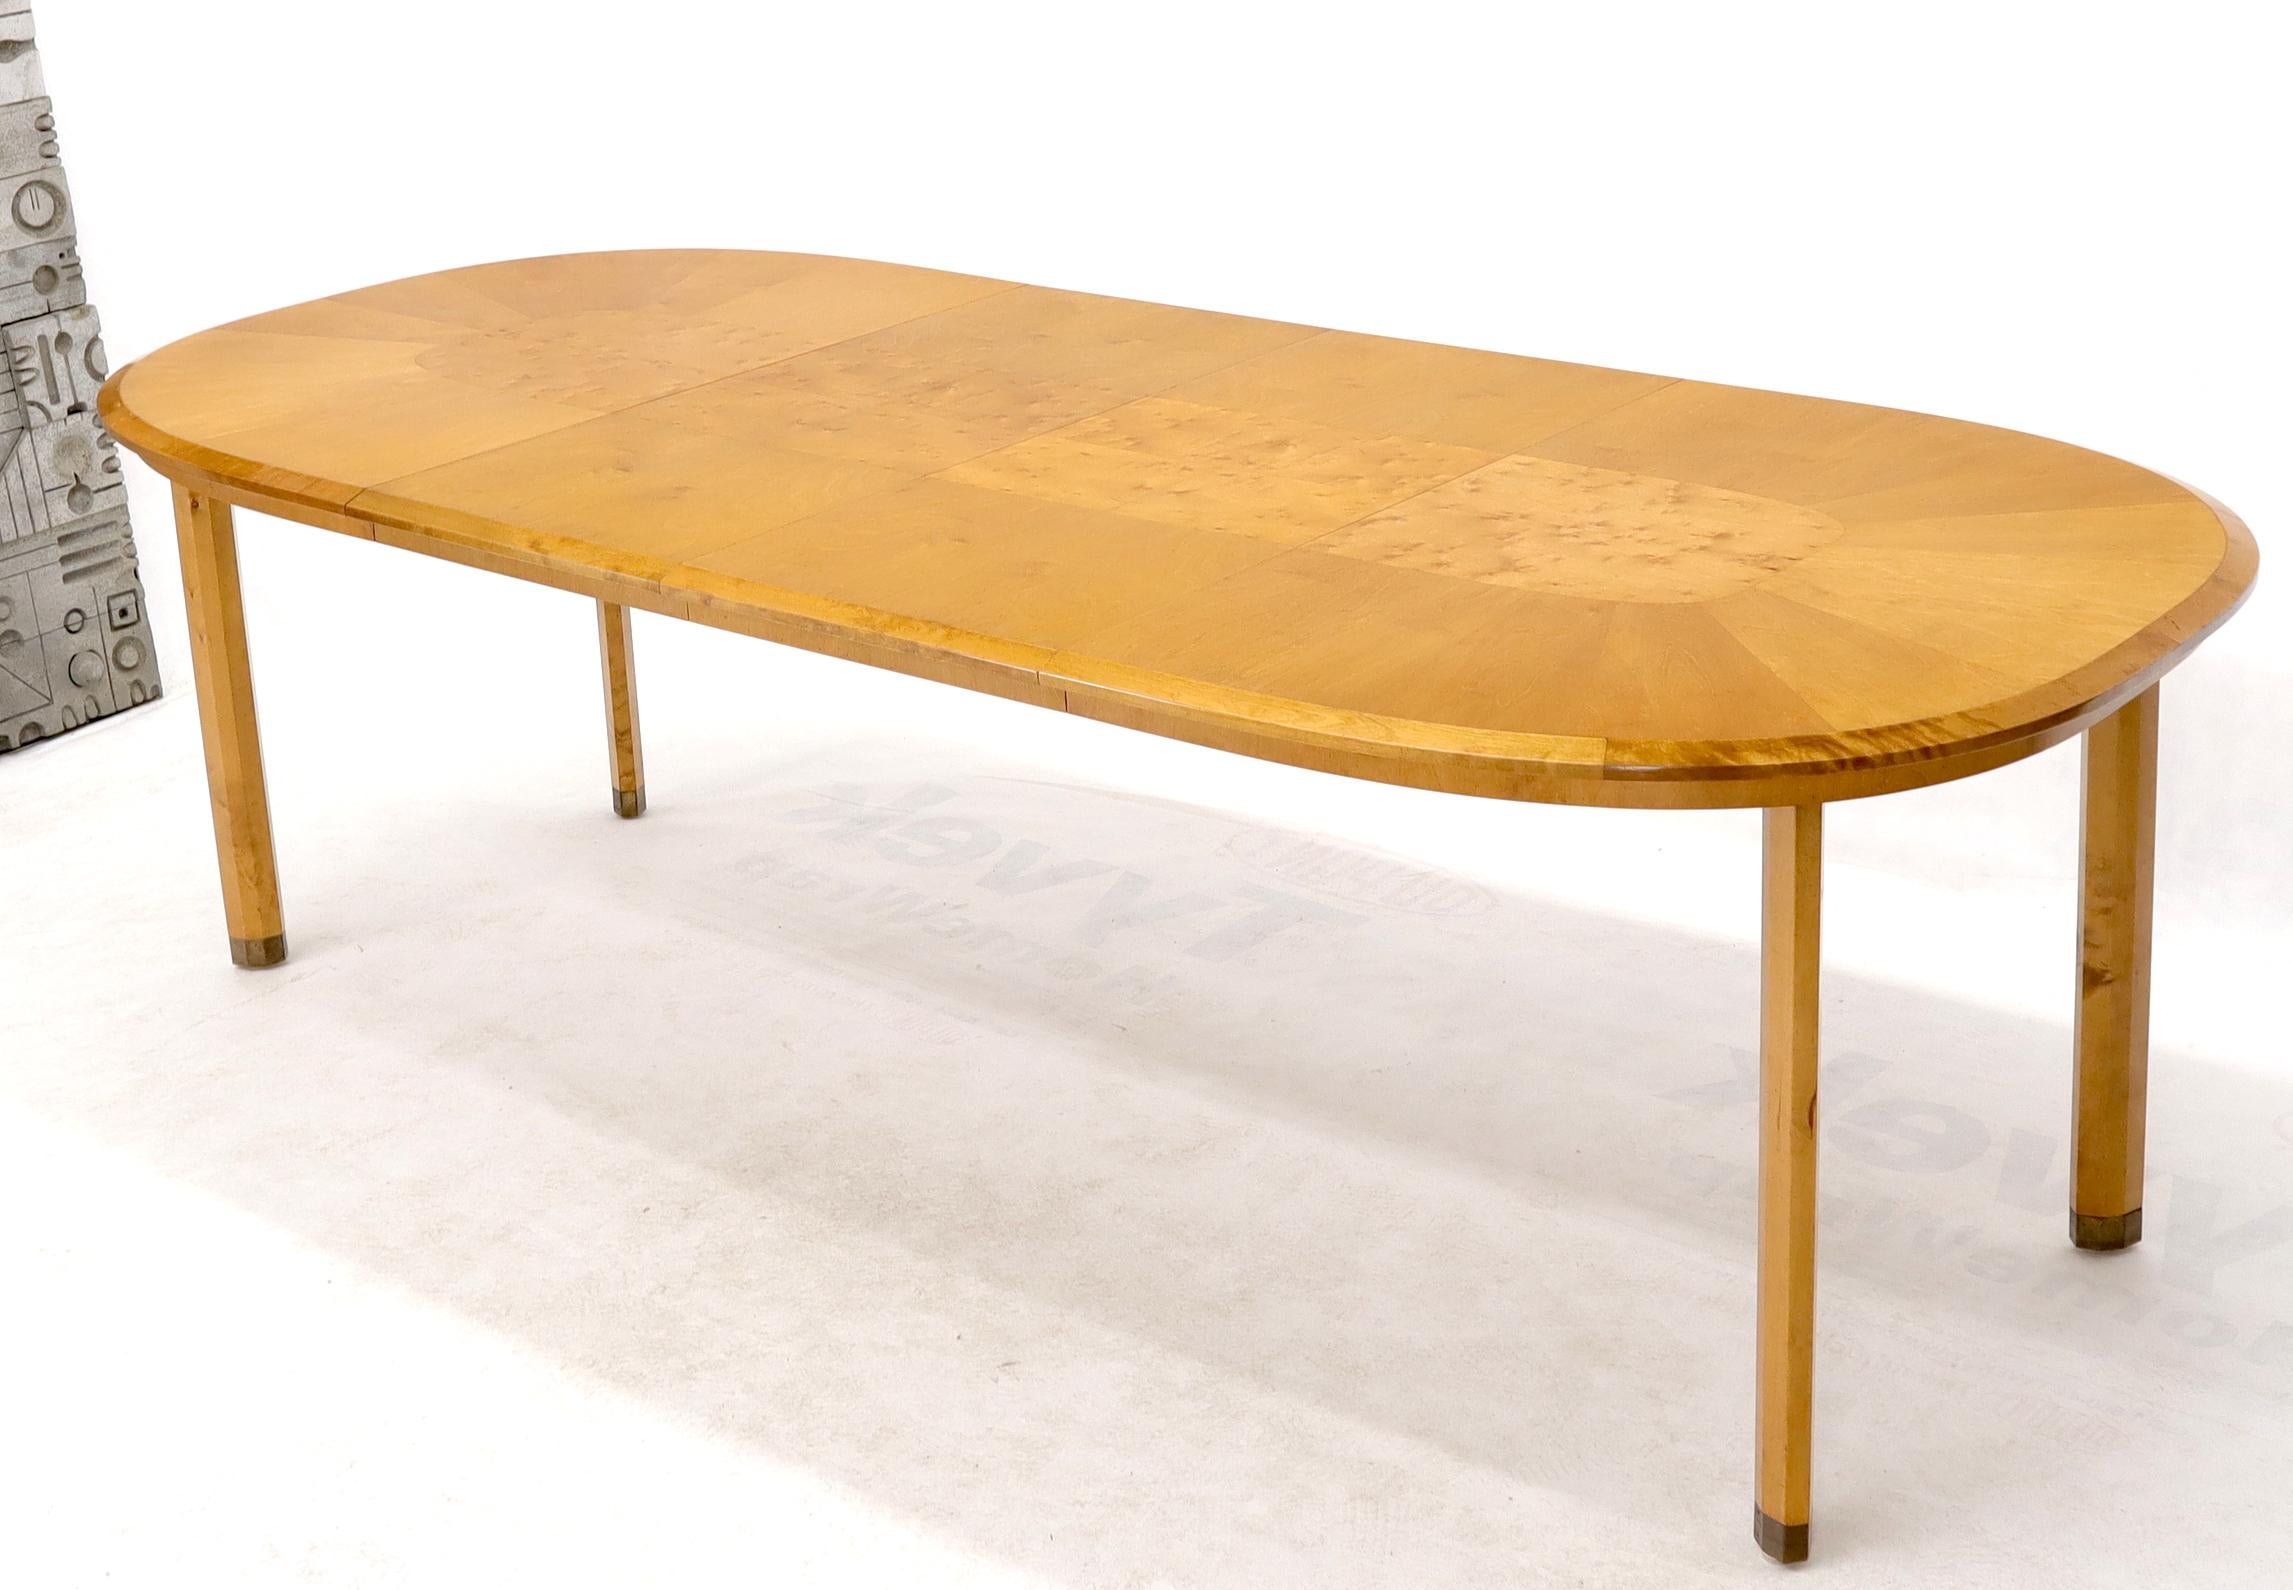 Lacquered Blond Swedish Birch with Burl Oval Racetrack Dining Table Spece